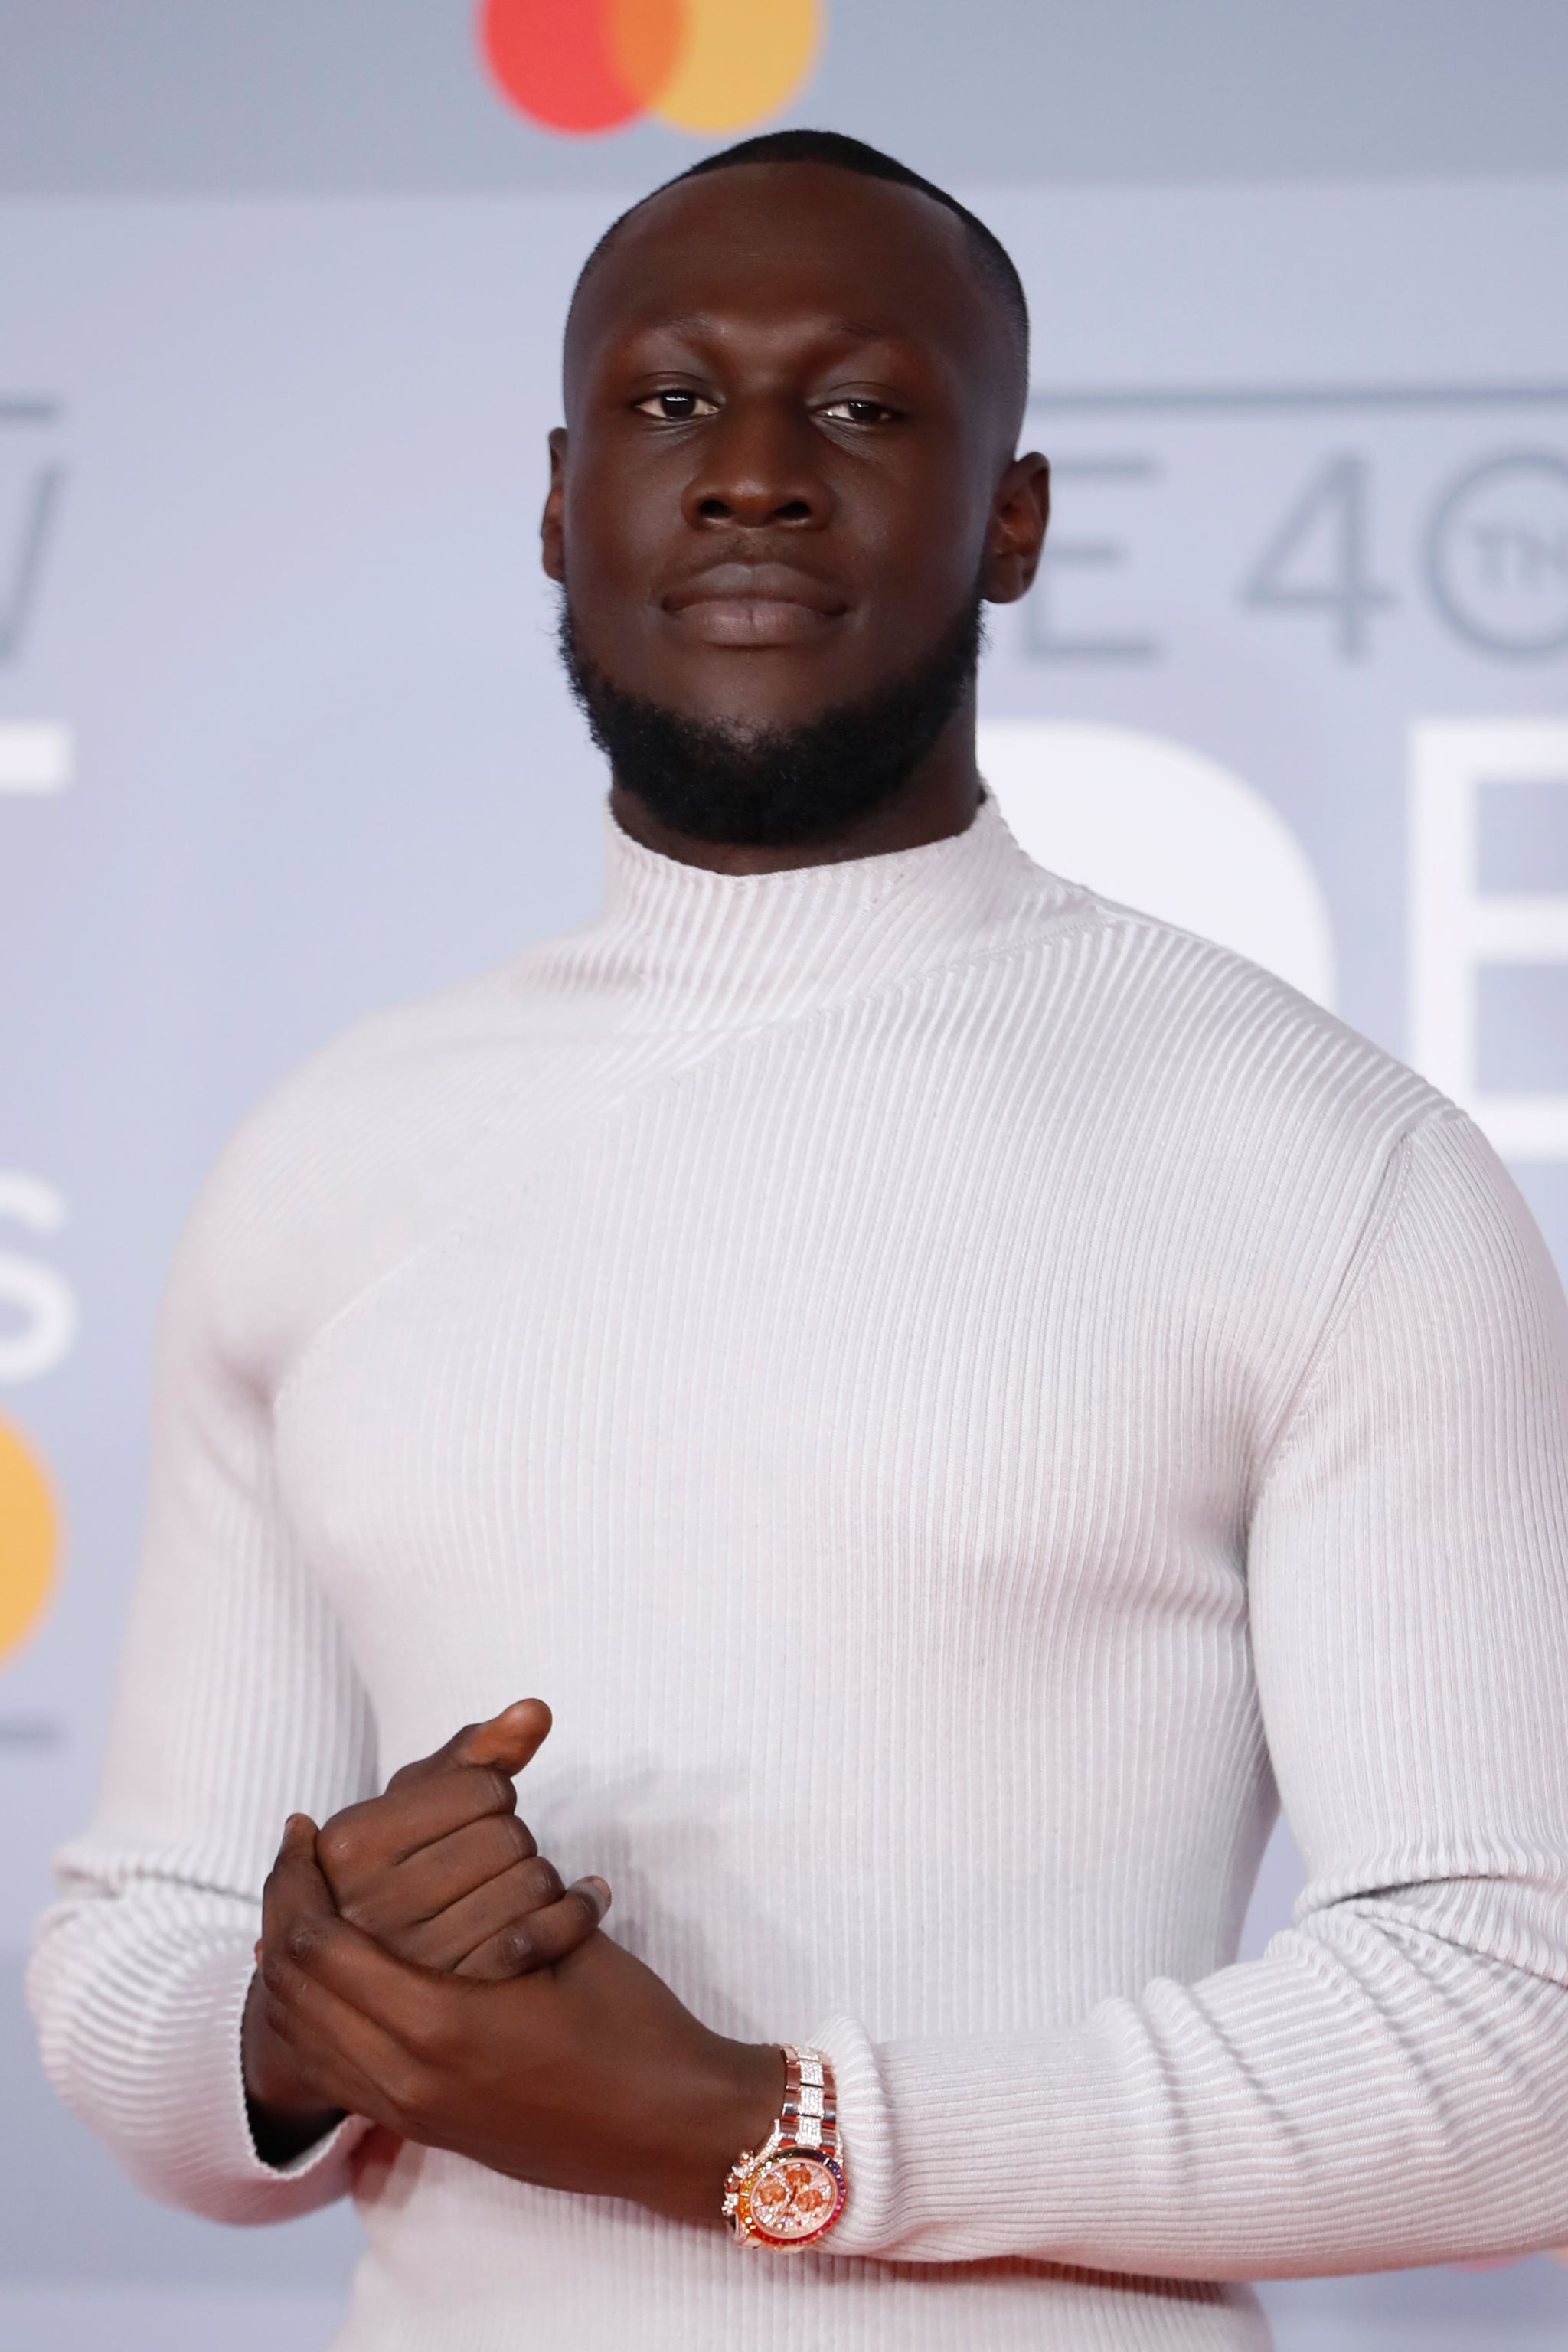 British grime and hip-hop artist Stormzy poses on the red carpet on arrival for the BRIT Awards 2020 in London on February 18, 2020. (Photo by Tolga AKMEN / AFP) / RESTRICTED TO EDITORIAL USE  NO POSTERS  NO MERCHANDISE NO USE IN PUBLICATIONS DEVOTED TO ARTISTS (Photo by TOLGA AKMEN/AFP via Getty Images)